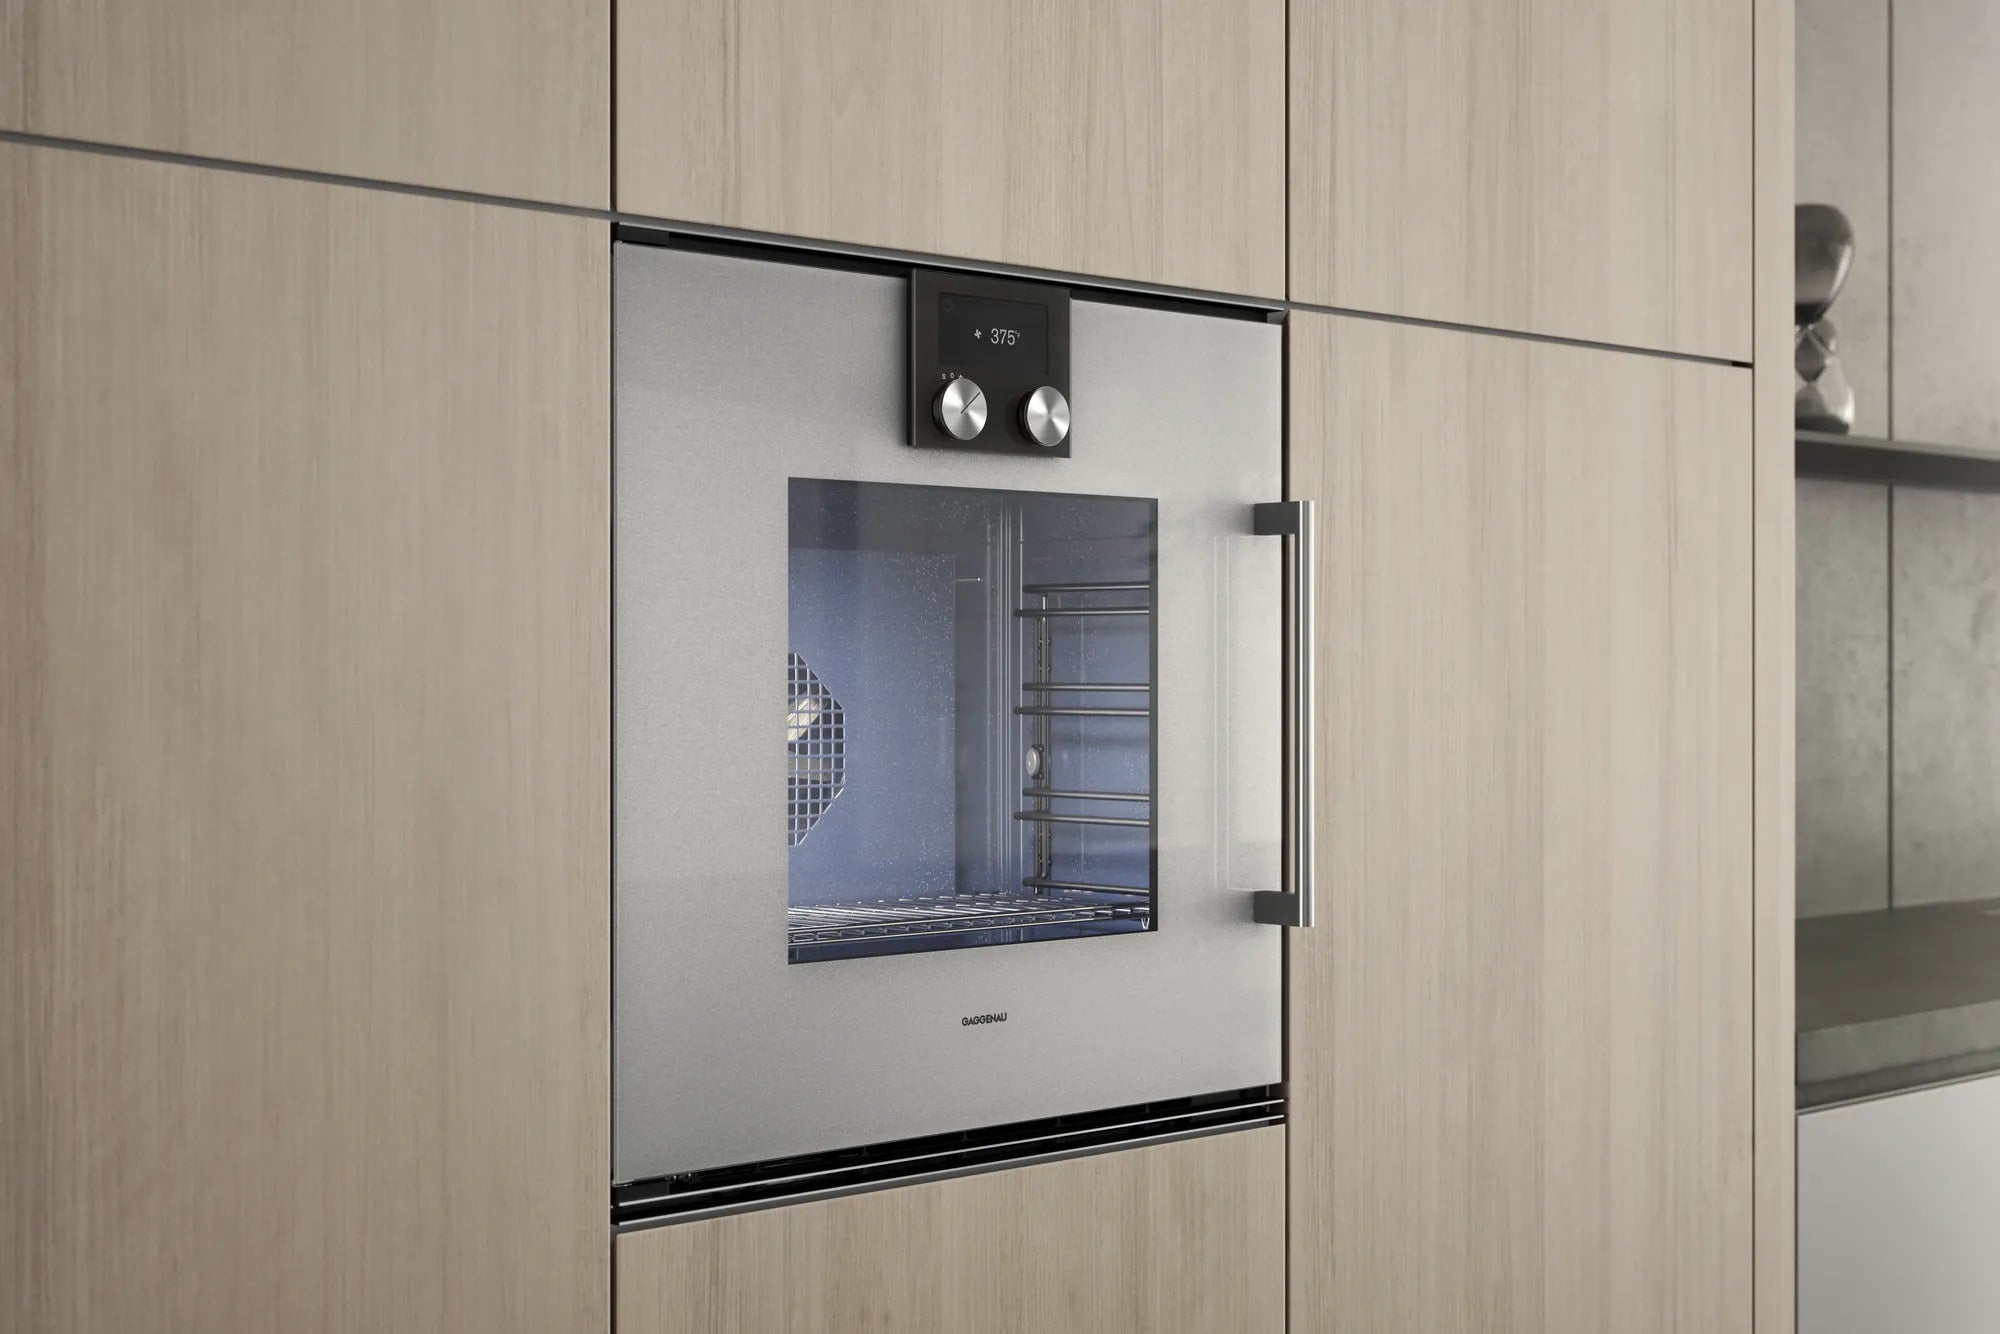 Gaggenau - 3.1 cu. ft Single Wall Oven in Stainless - BOP251612